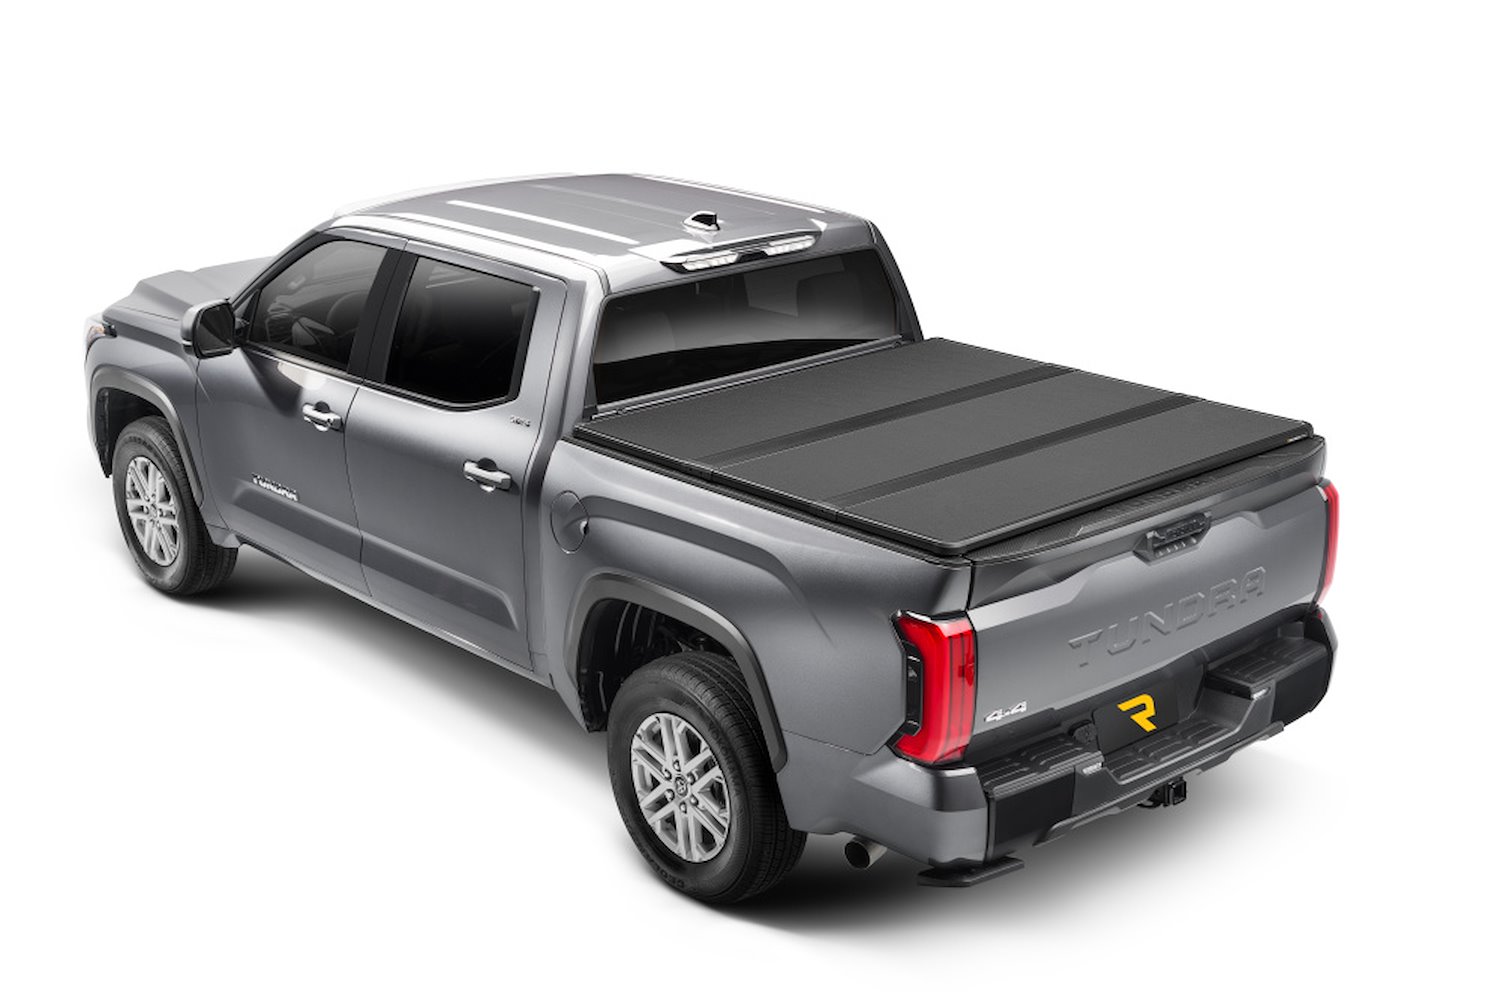 88461 Solid Fold ALX Tonneau Cover for 14-21 Tundra 5 ft.7 in. w/ Deck Rail Sys w/out Trl Spcl Edtn Strg Bxs